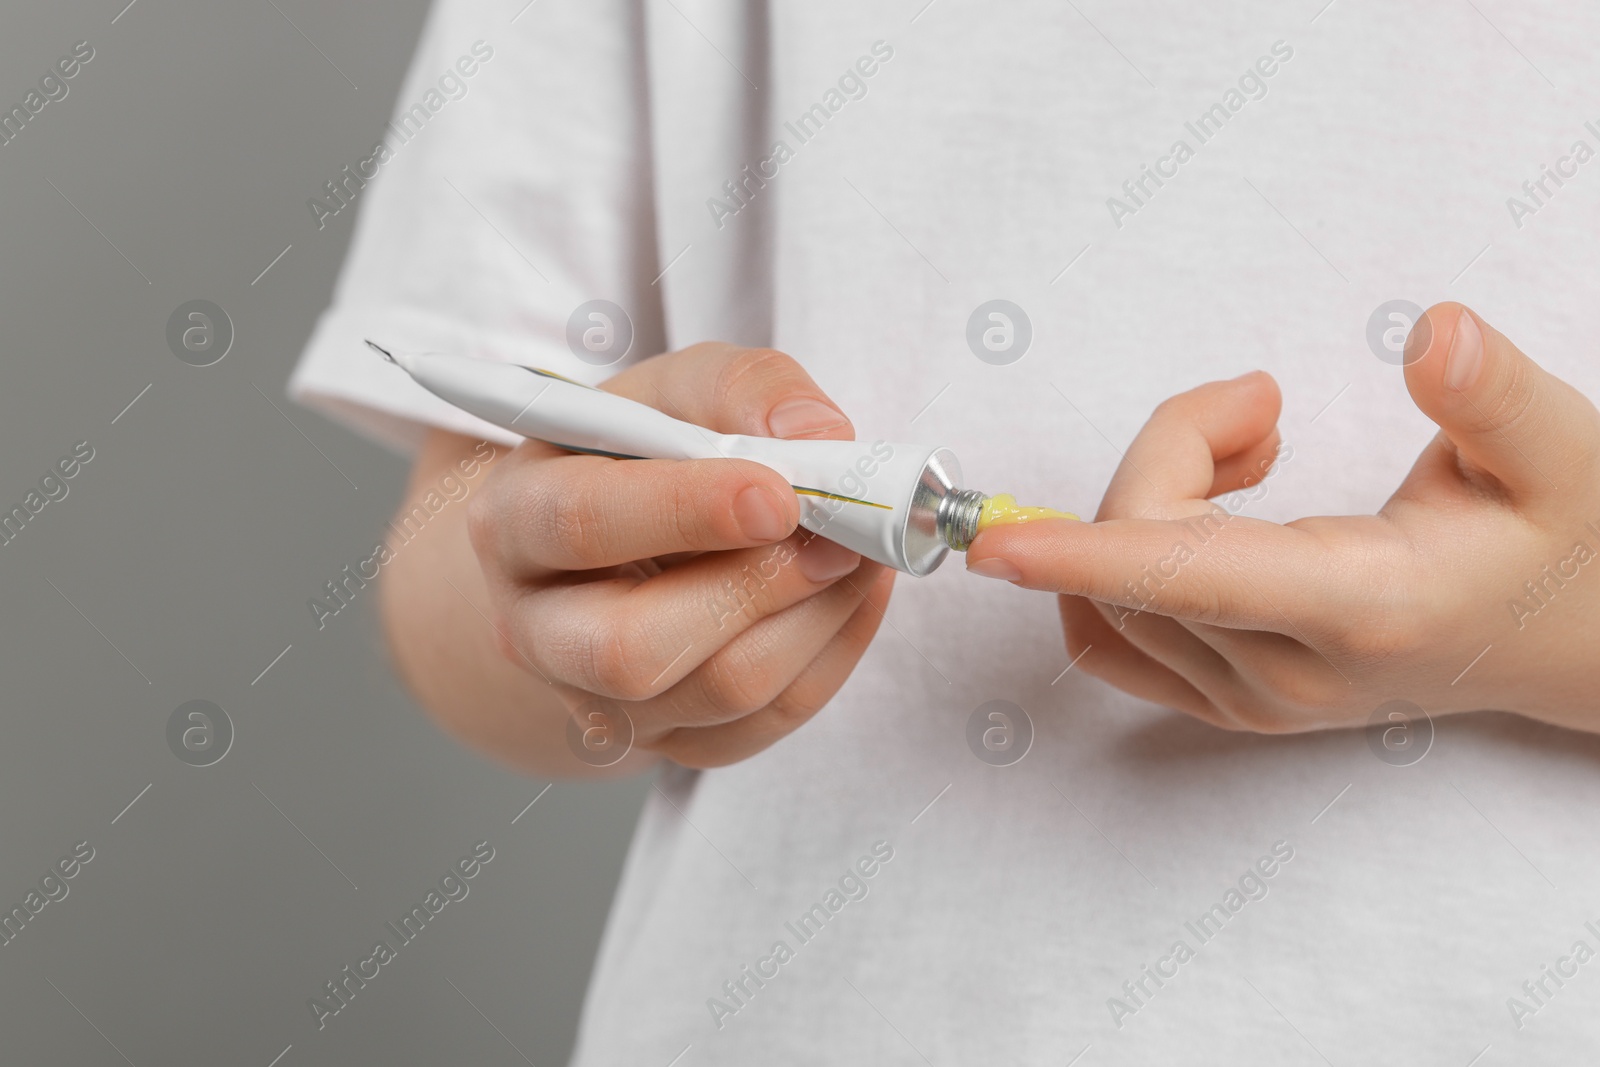 Photo of Child applying ointment onto hand against grey background, closeup